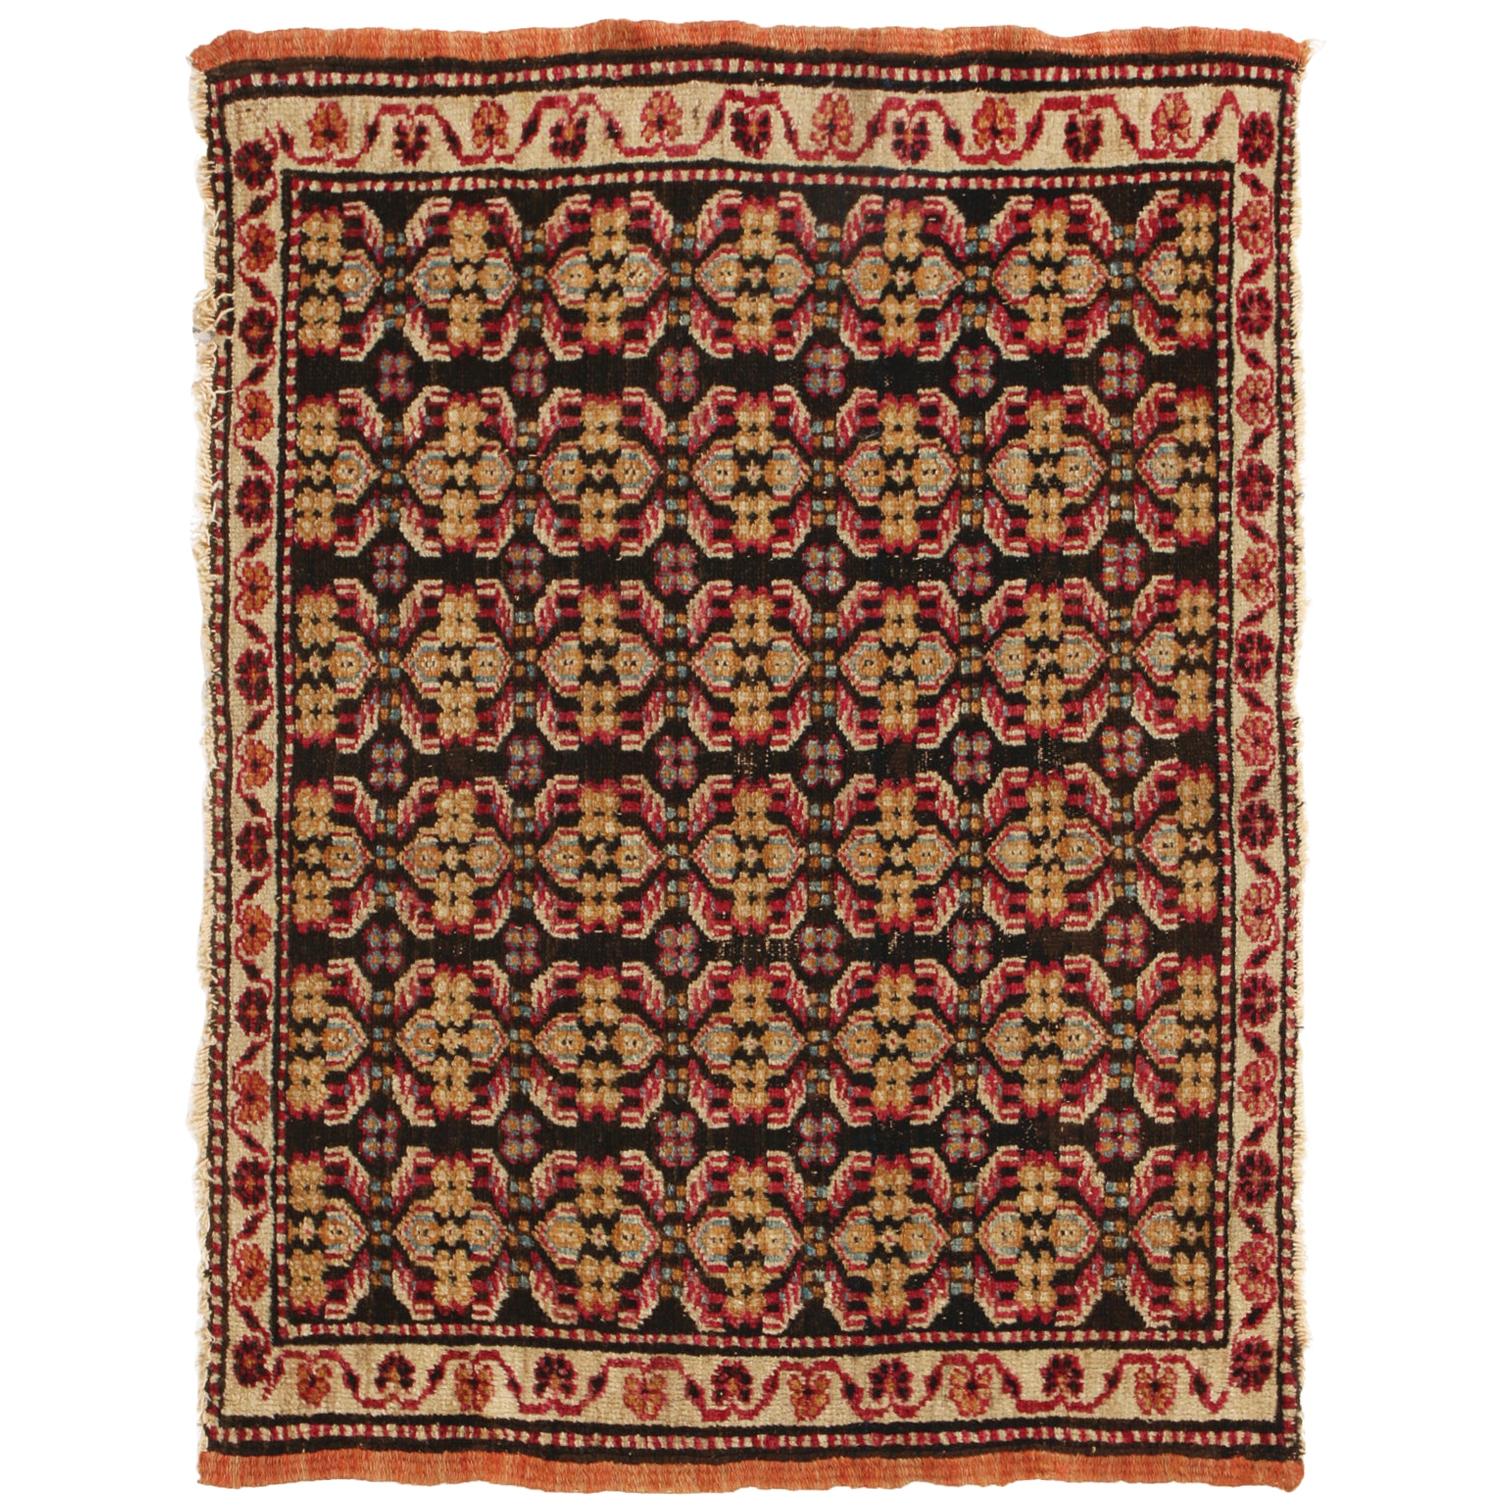 Antique Agra Geometric Beigr and Red Wool Floral Rug